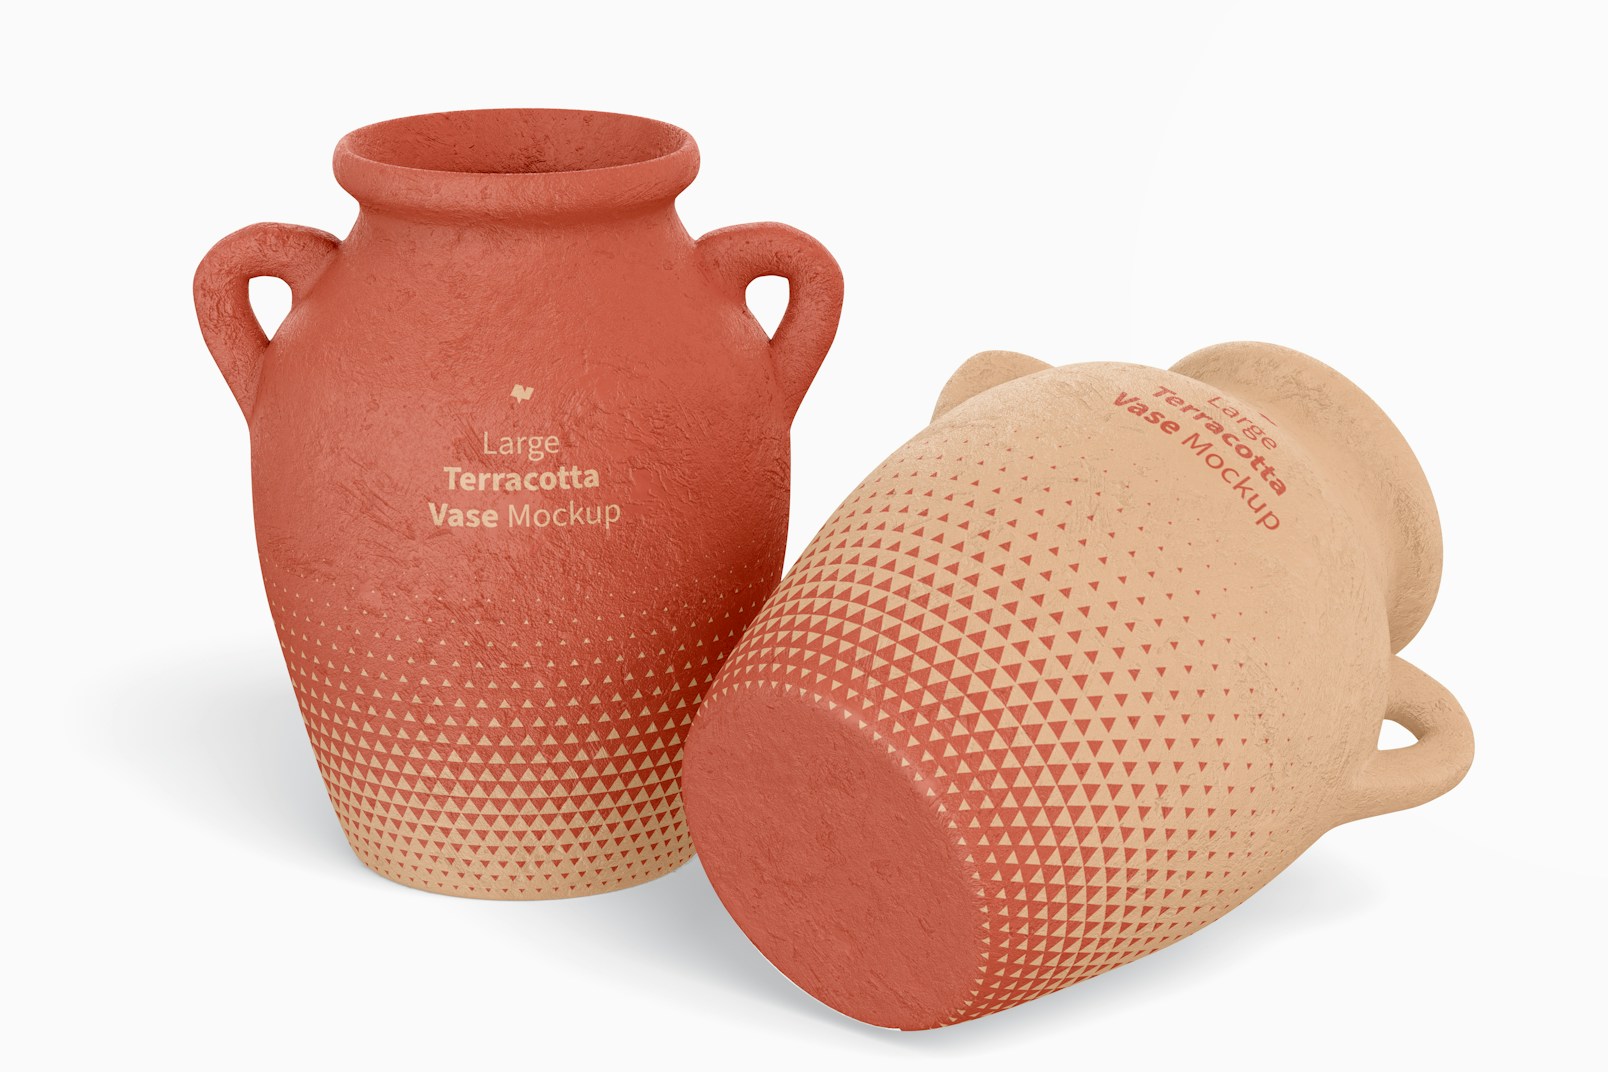 Large Terracotta Vases with Handles Mockup, Standing and Dropped